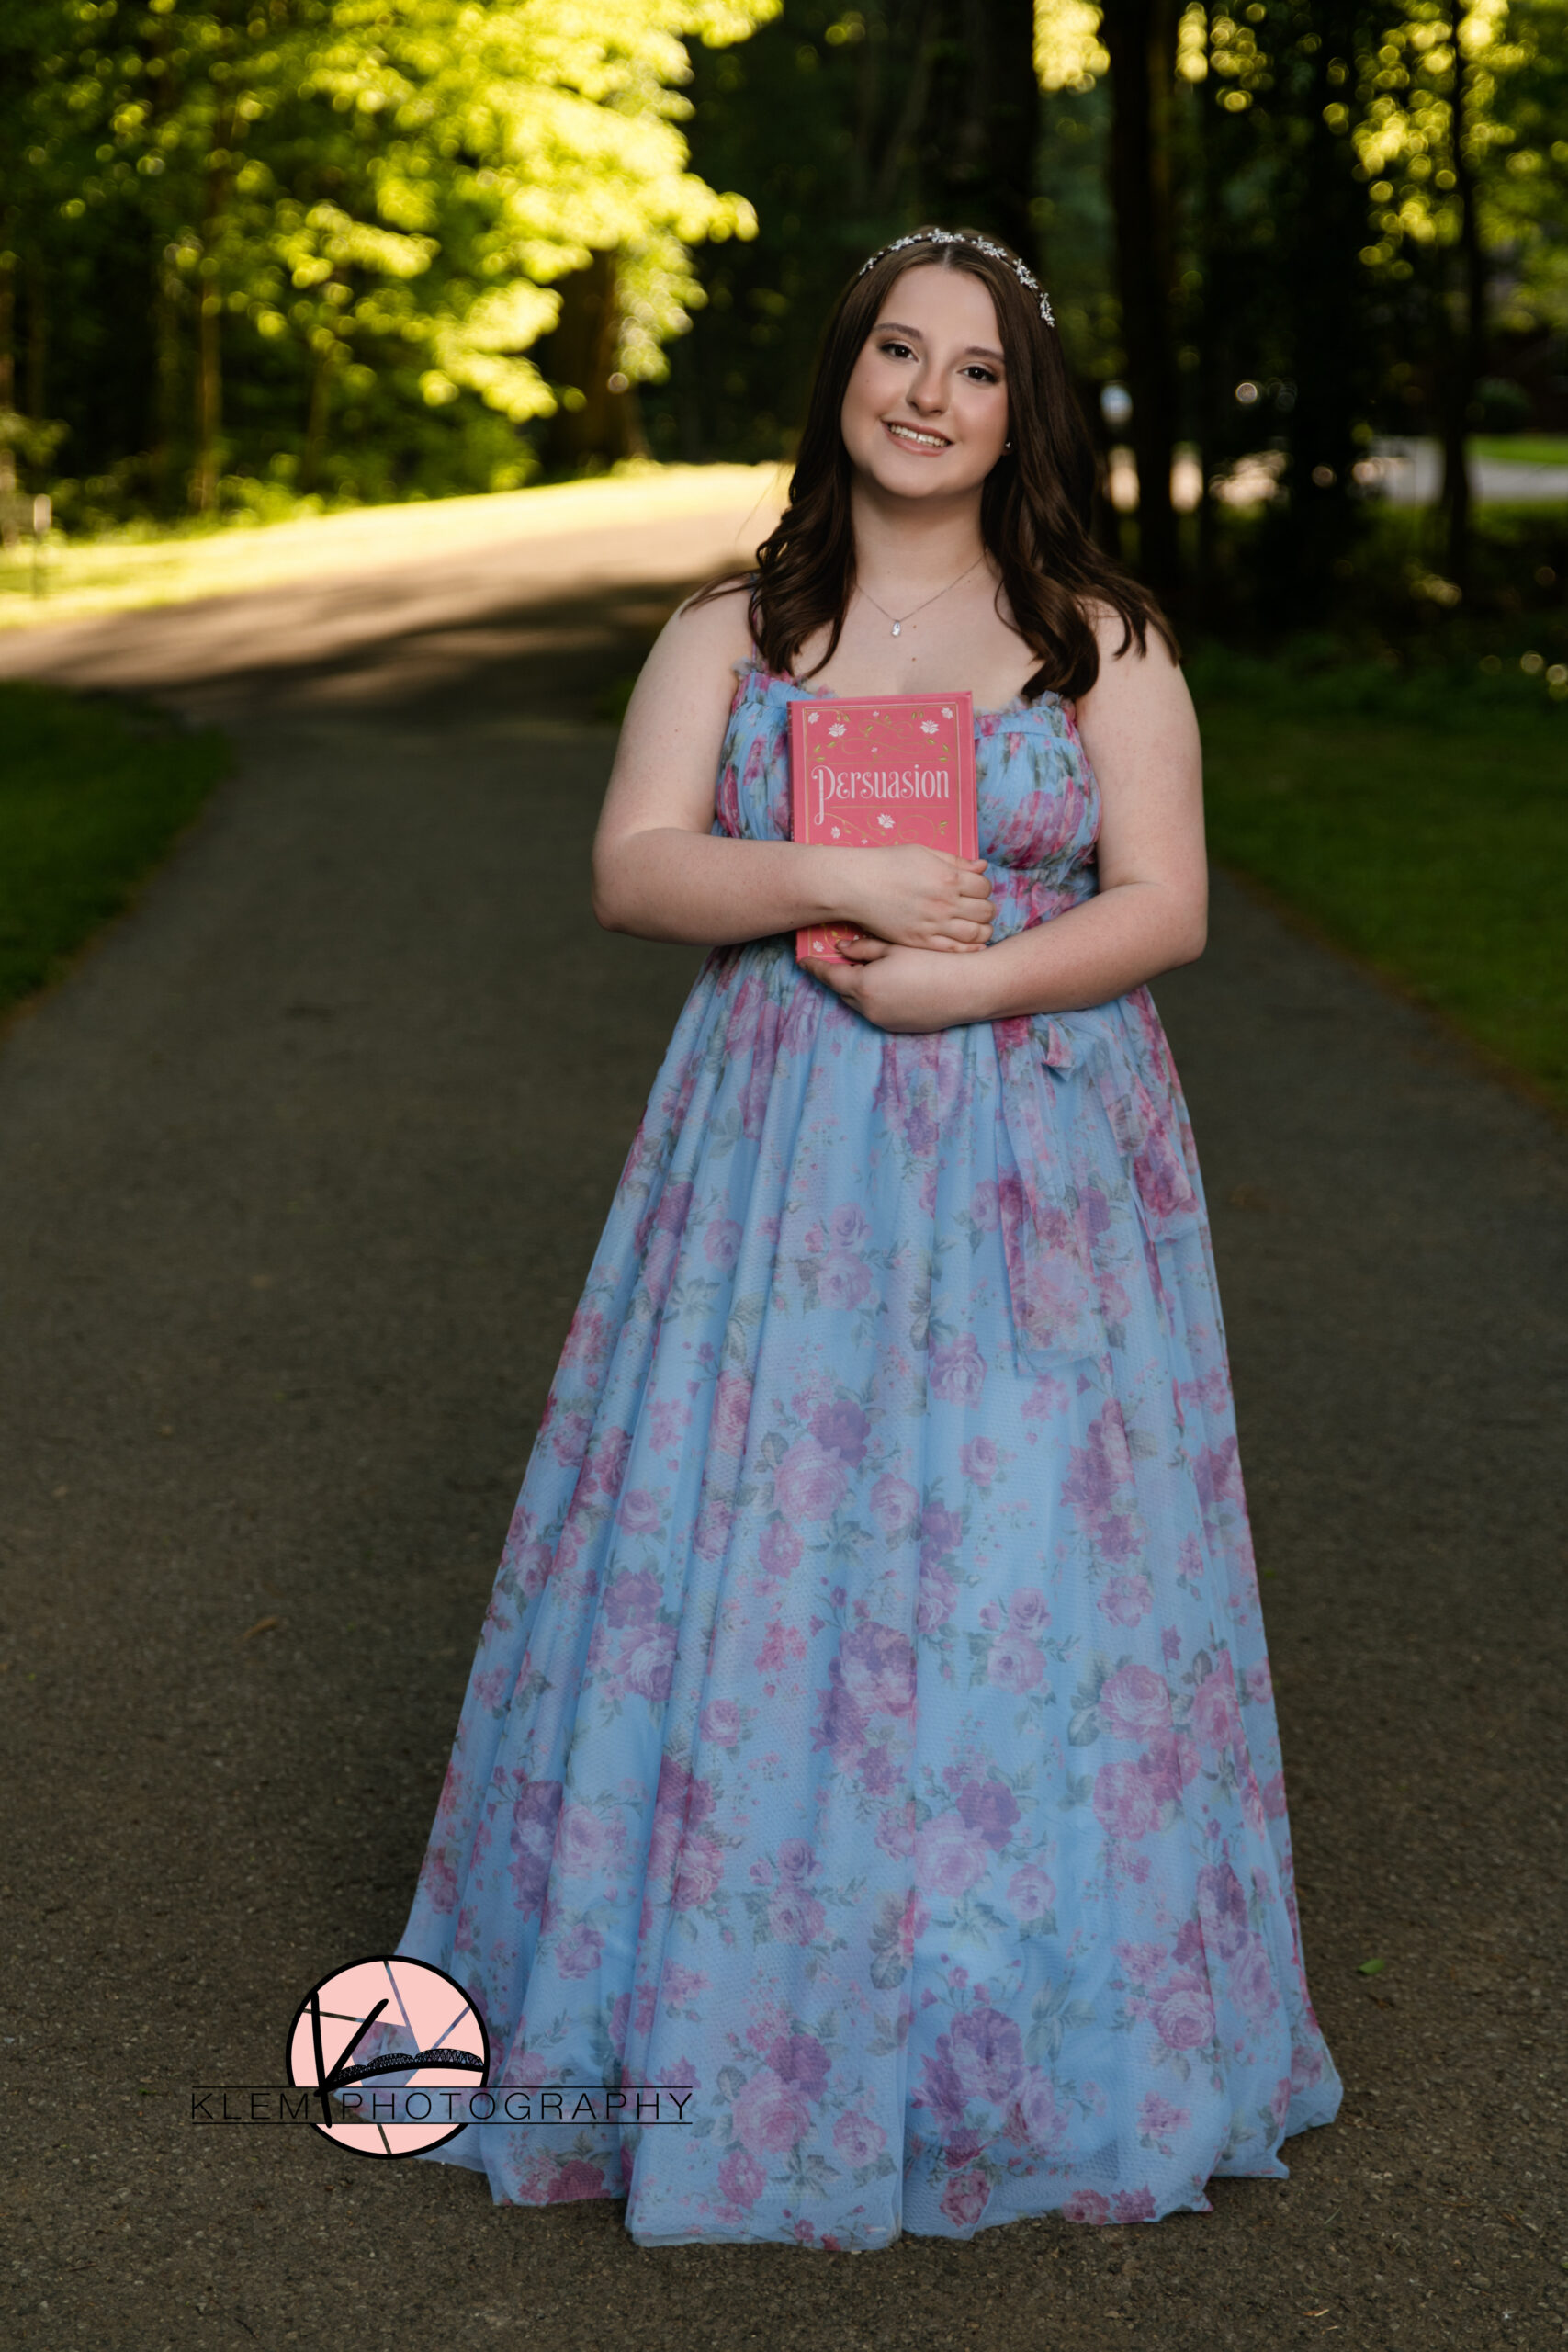 Castle High School Newburgh Indiana senior pictures with Klem photography at Audubon Park in Henderson KY as girl stands in blue prom dress holding Persuasion by Jane Austin.